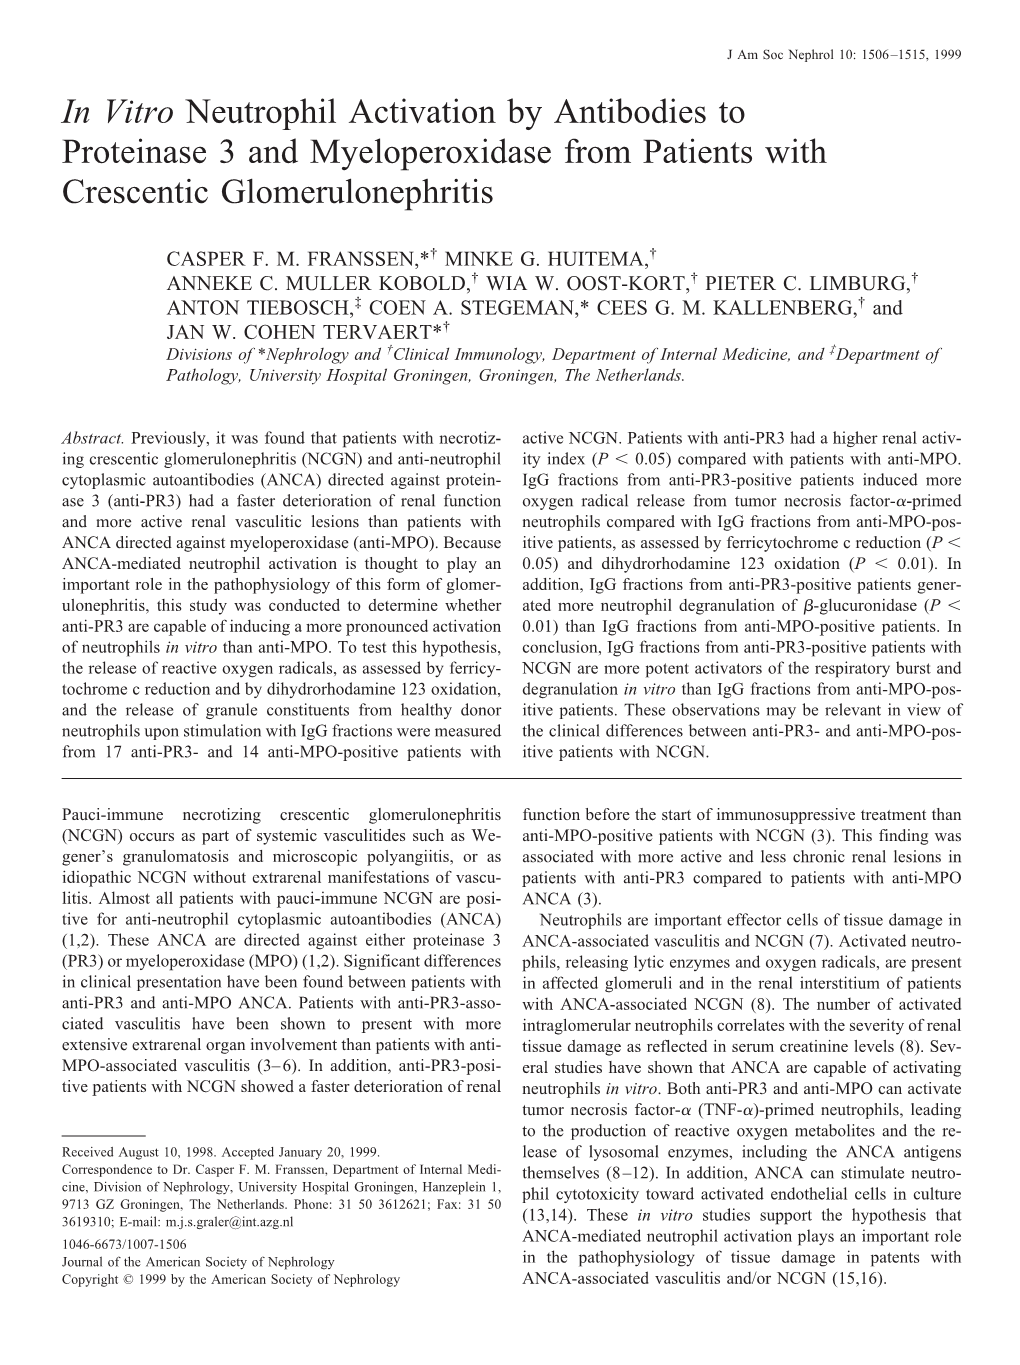 In Vitro Neutrophil Activation by Antibodies to Proteinase 3 and Myeloperoxidase from Patients with Crescentic Glomerulonephritis